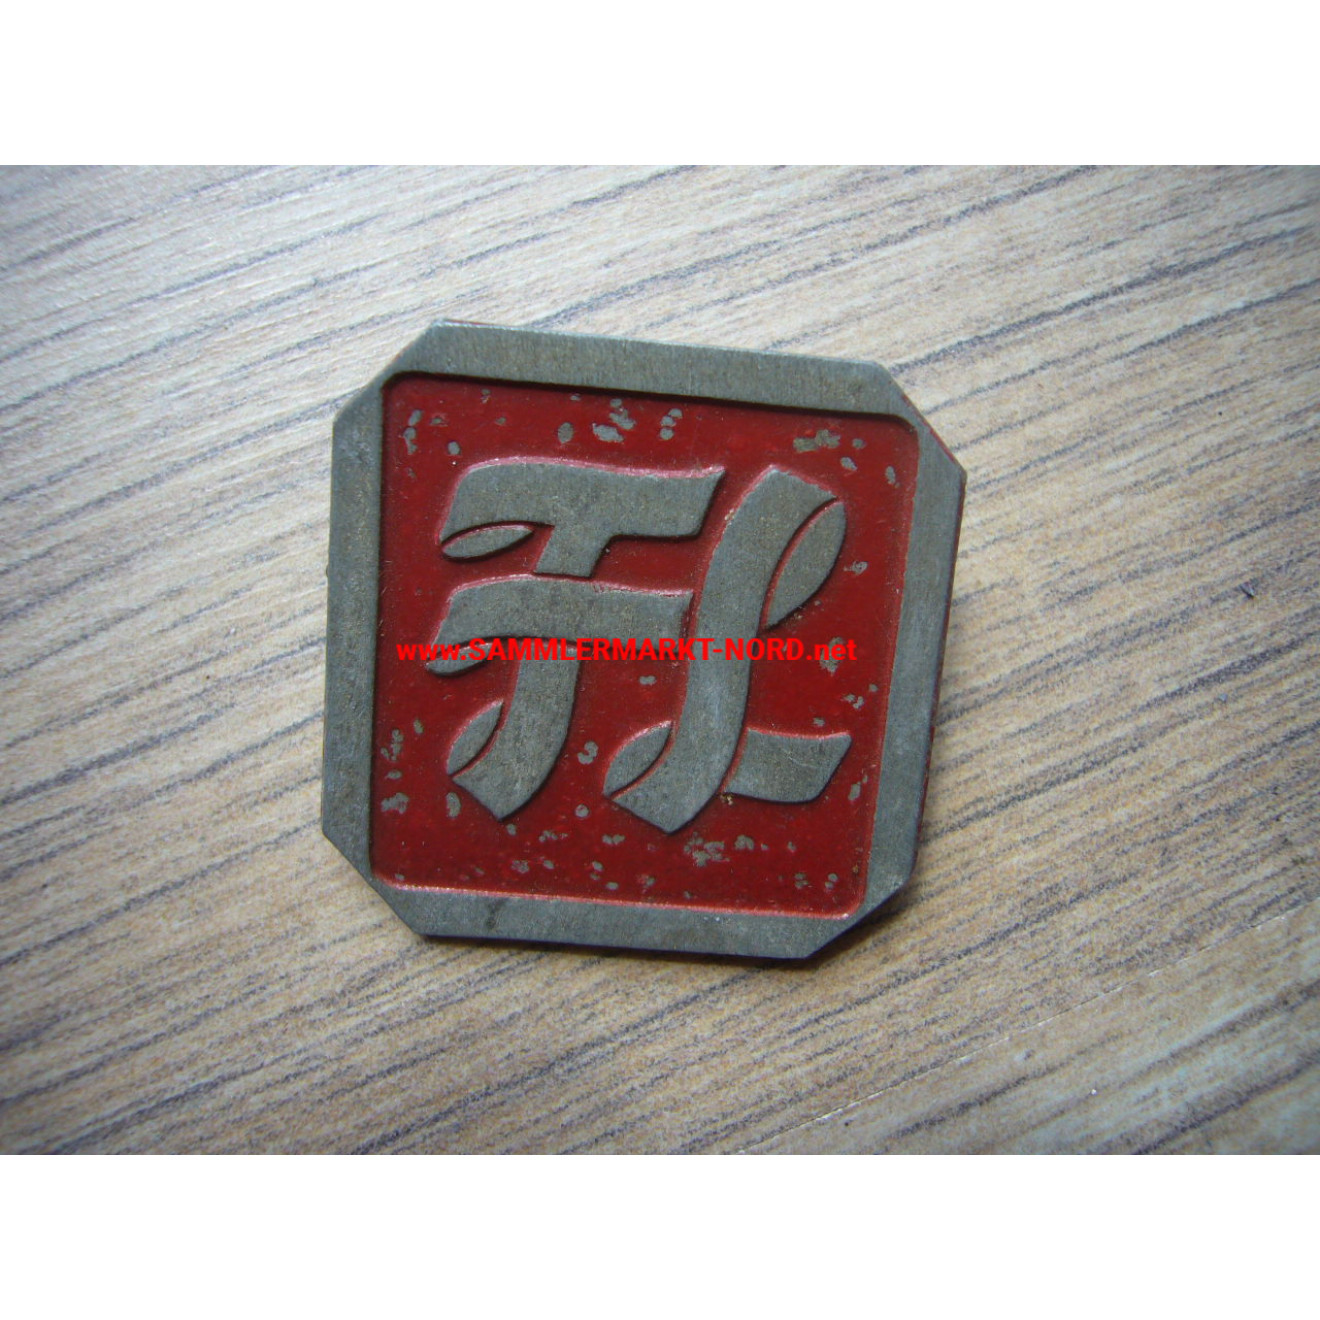 FAHLBERG-LIST company, Magdeburg - armaments factory - identity badge for employees (red)